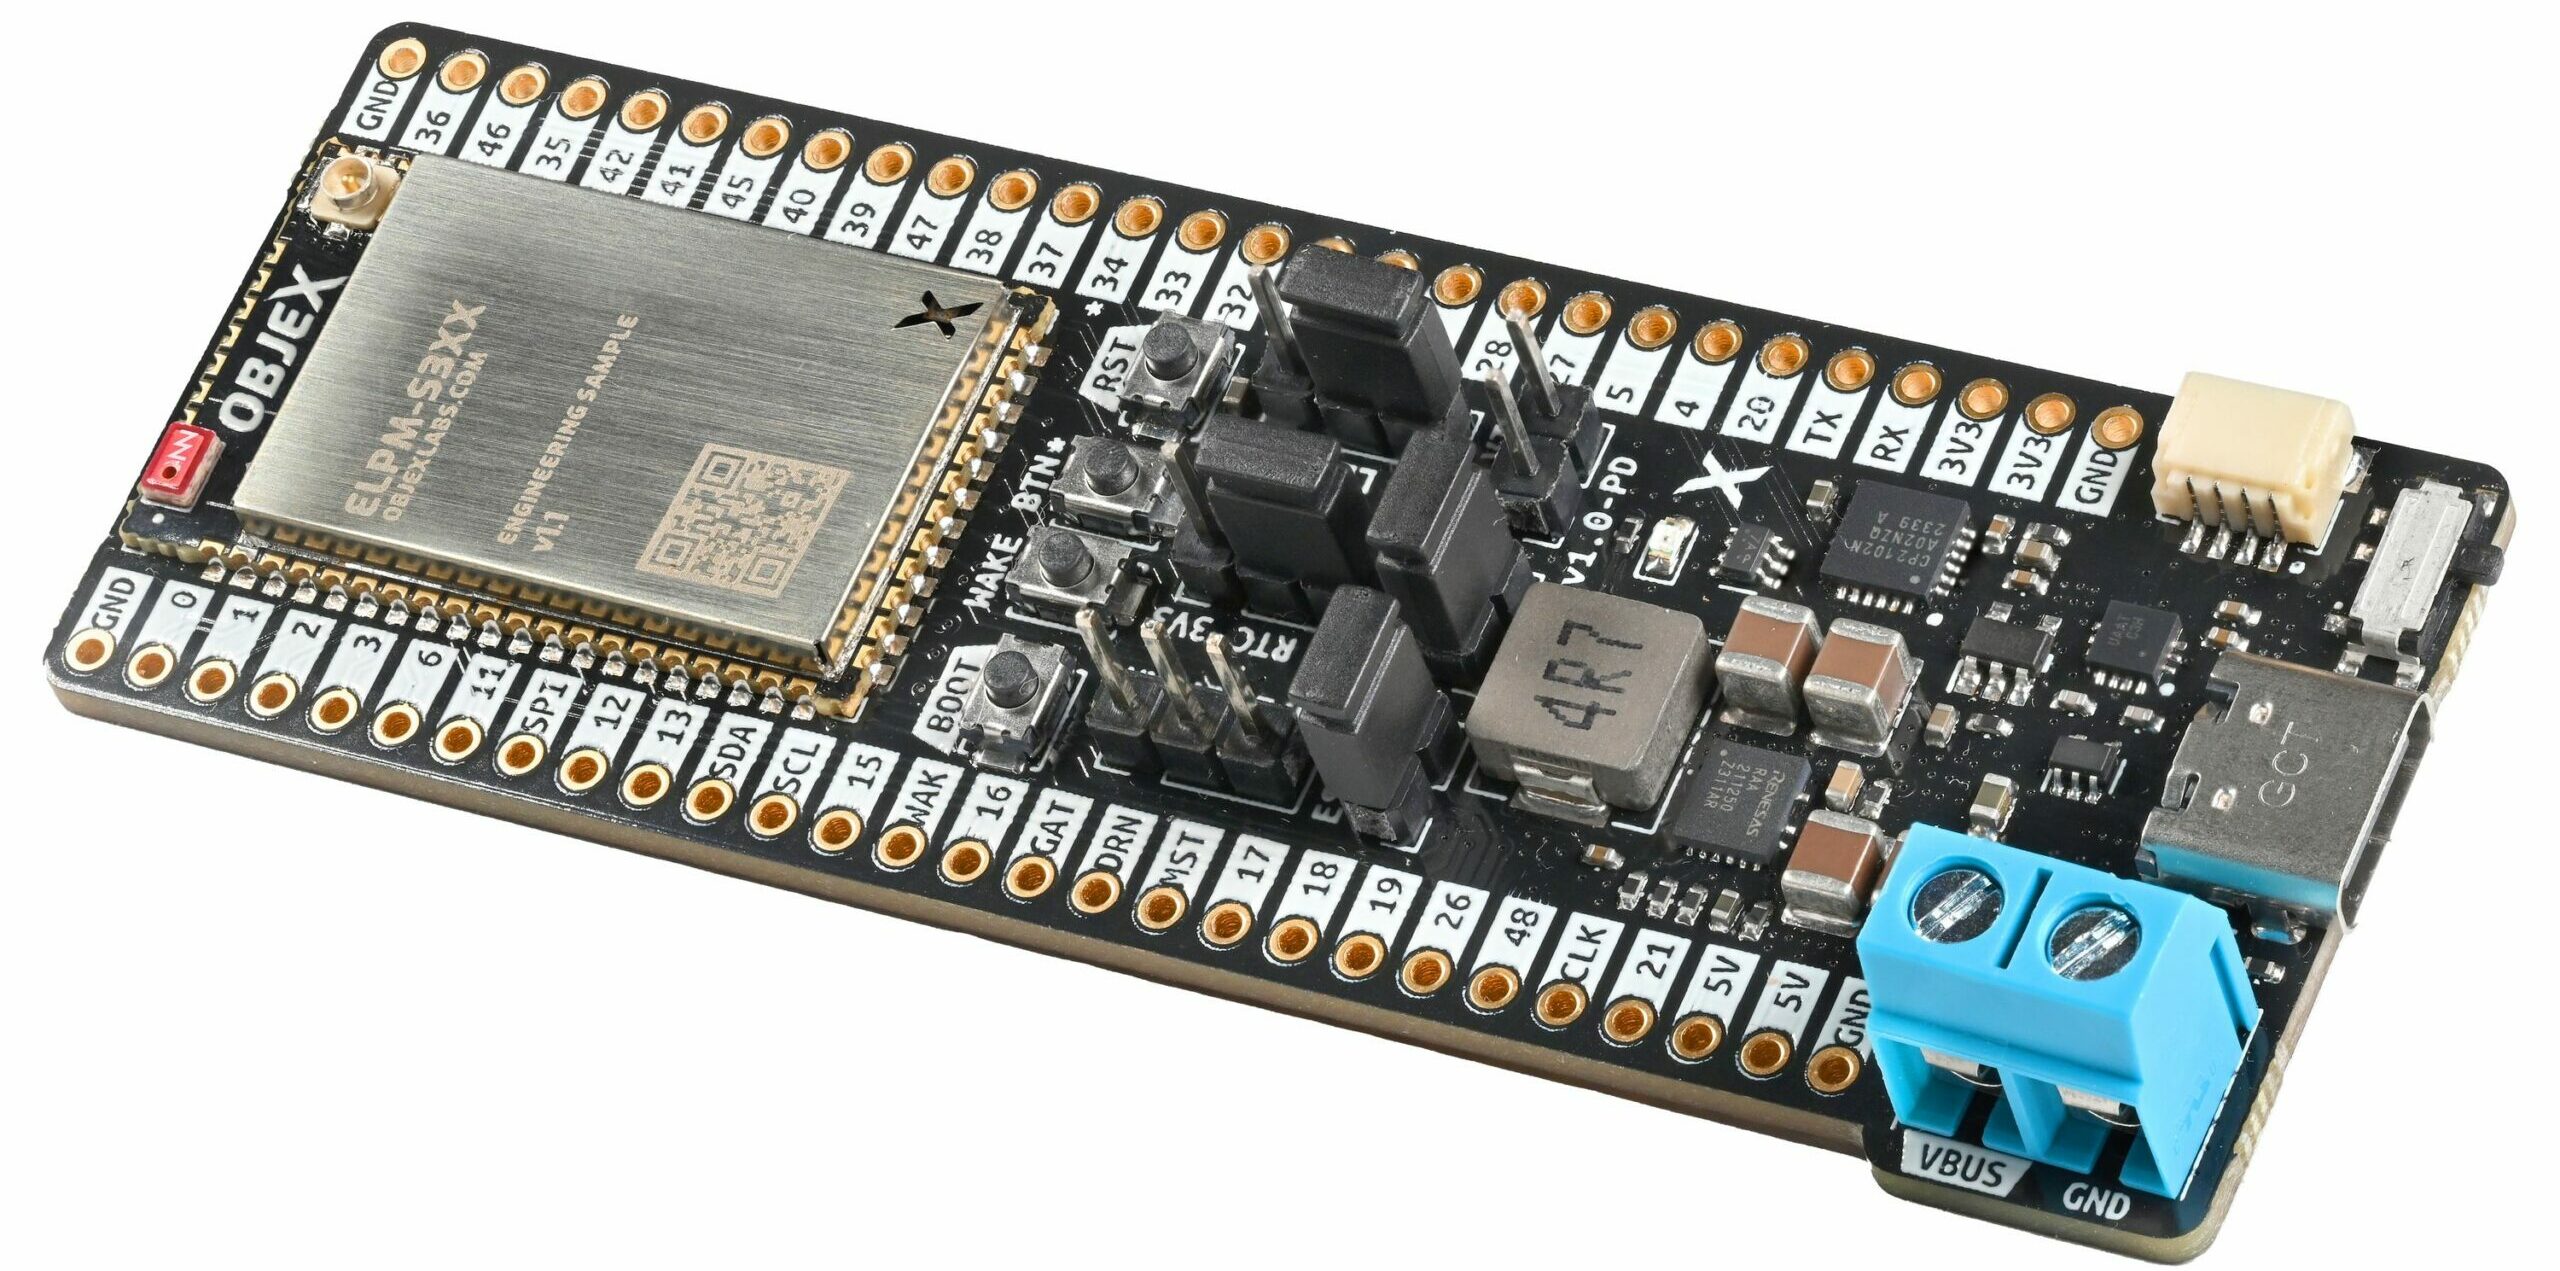 OBJEX Link S3LW IoT development board Includes Wi-Fi, Bluetooth, and LoRa Connectivity